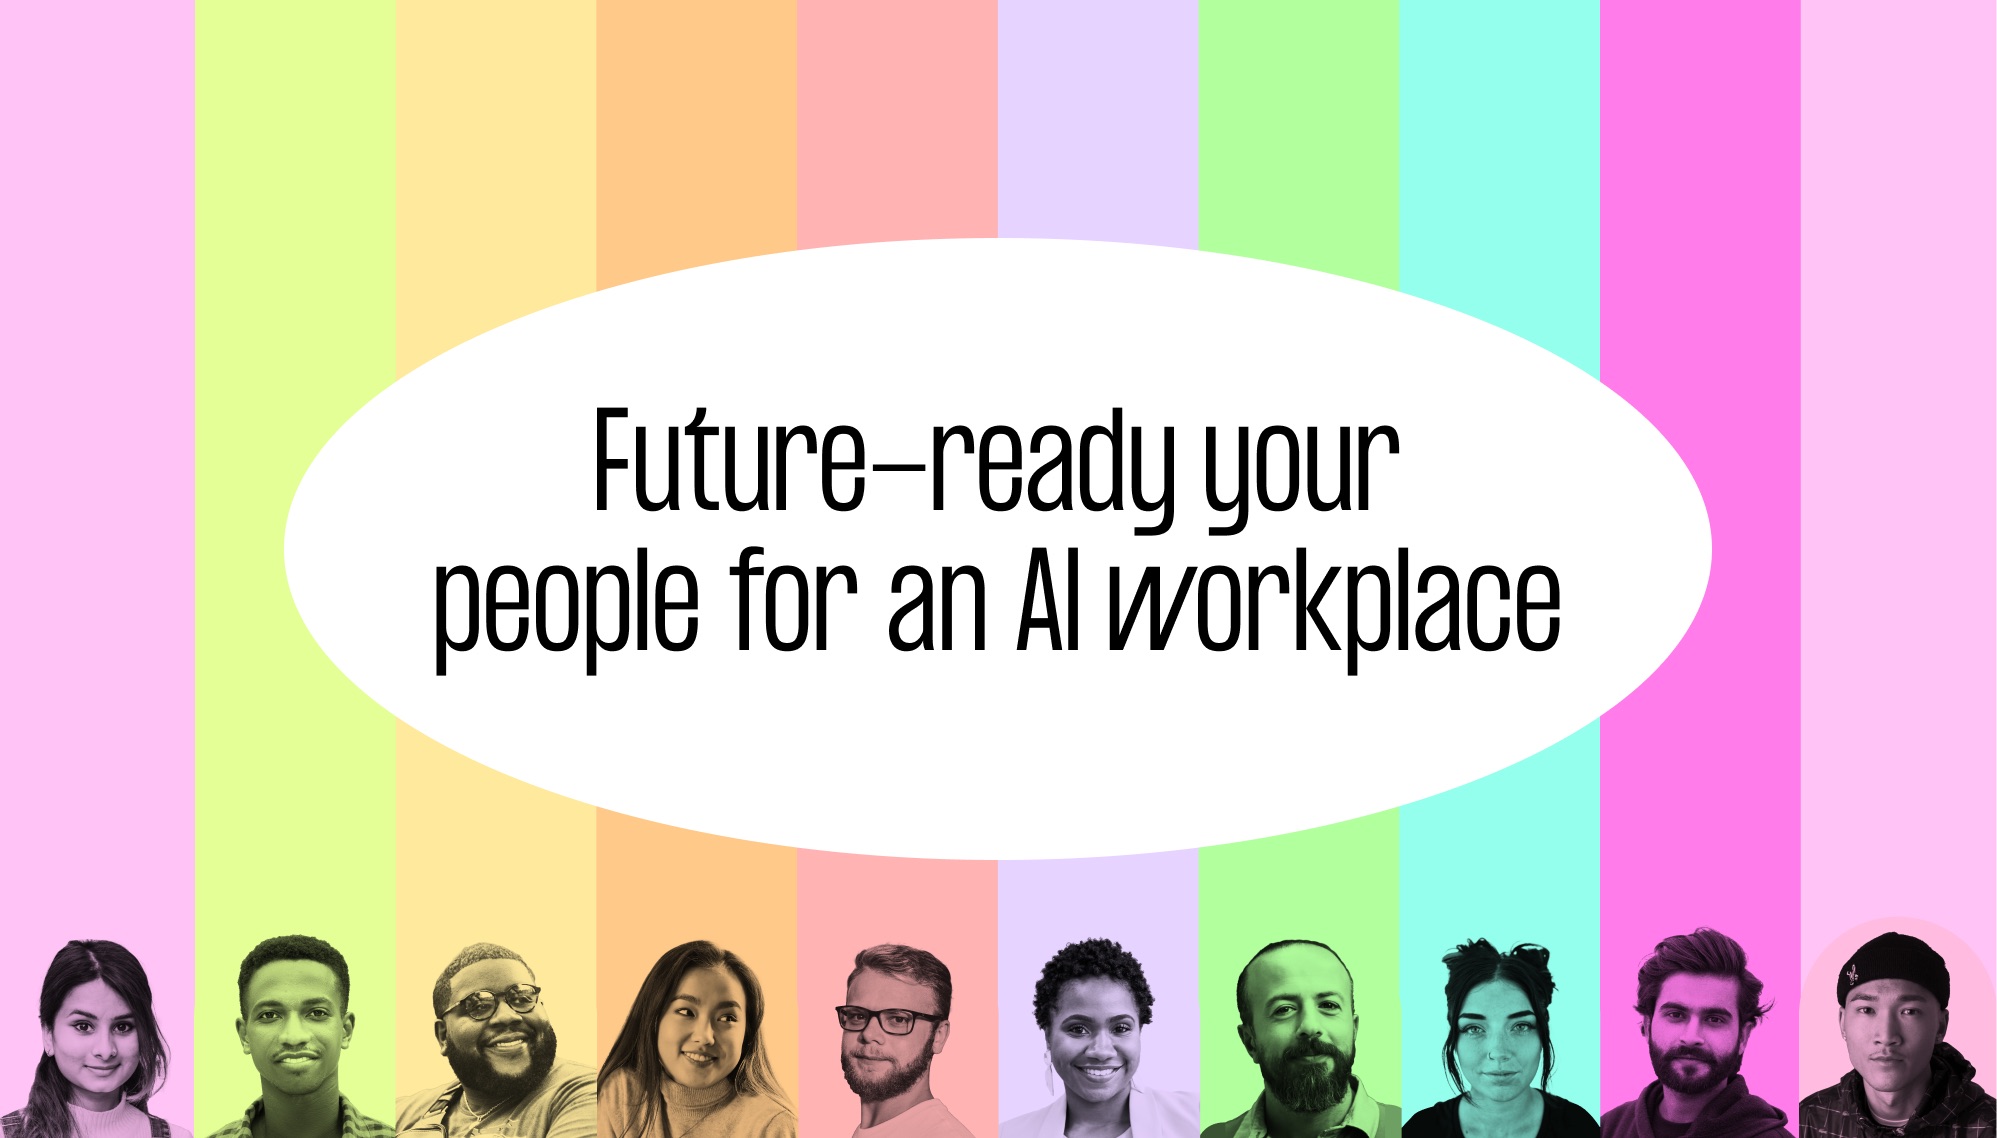 Future-ready your people for an AI workplace